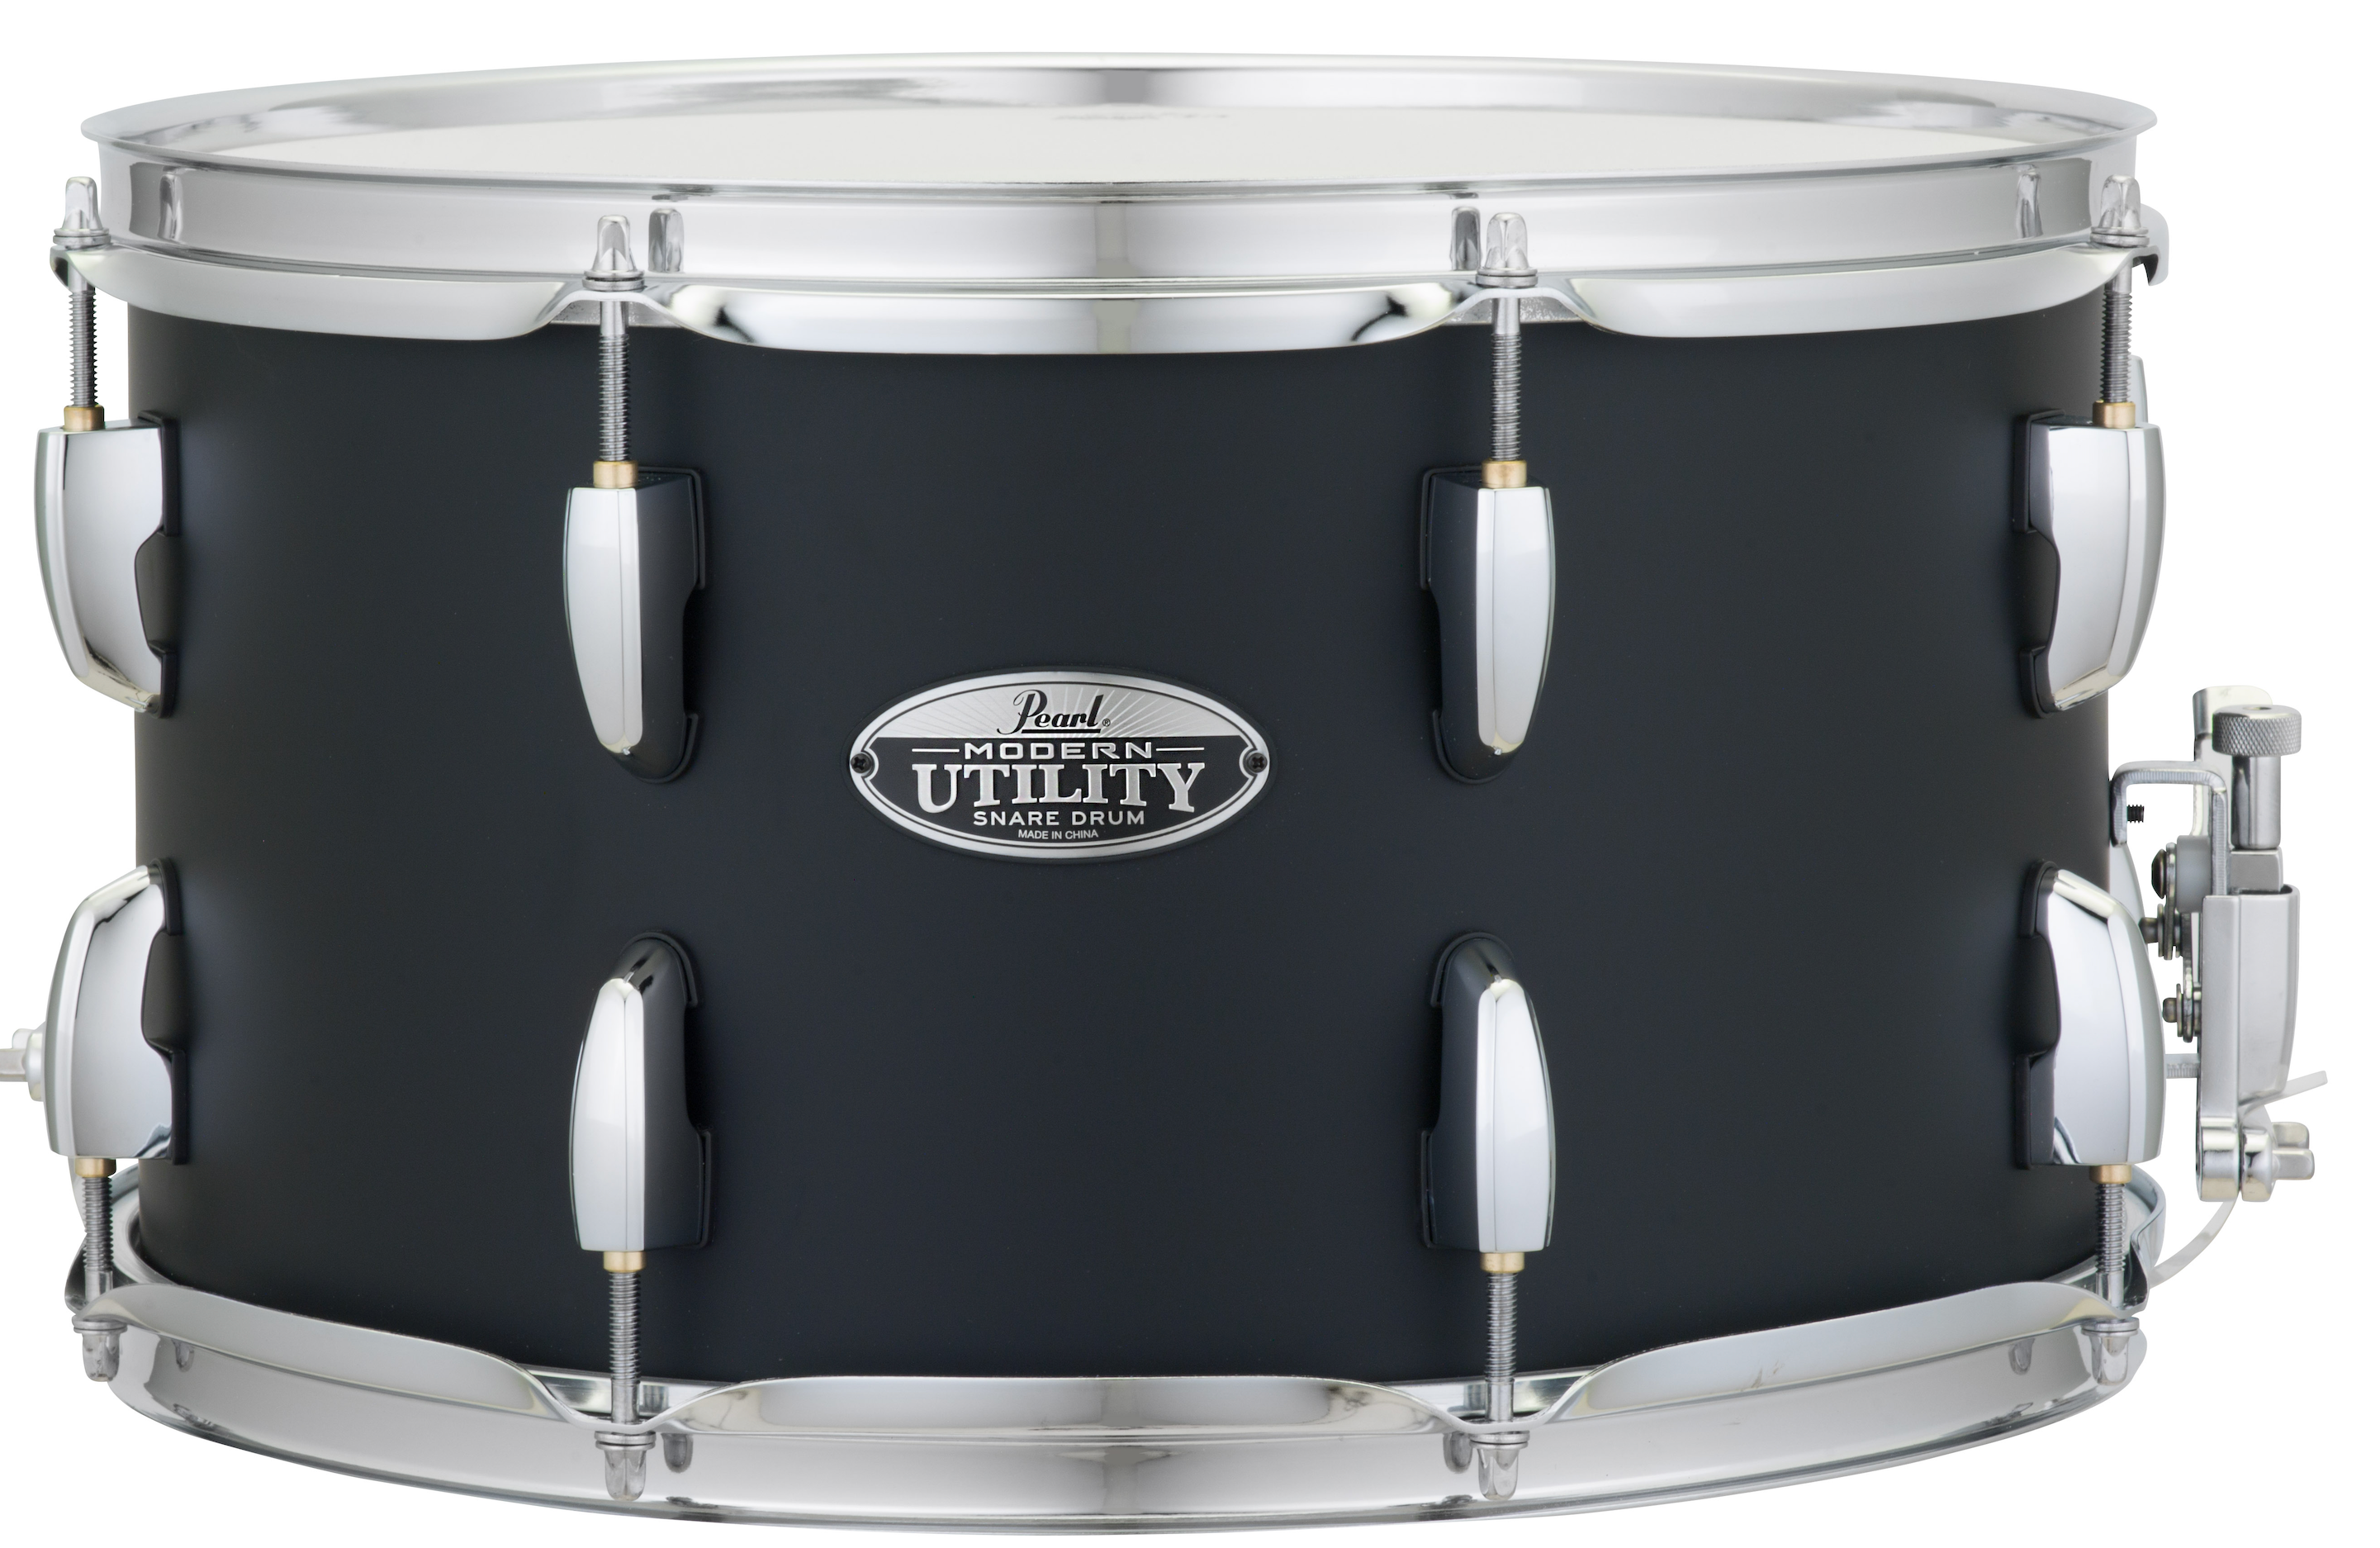 Pearl Drums on X: The grain on this 14x5 Philharmonic Solid